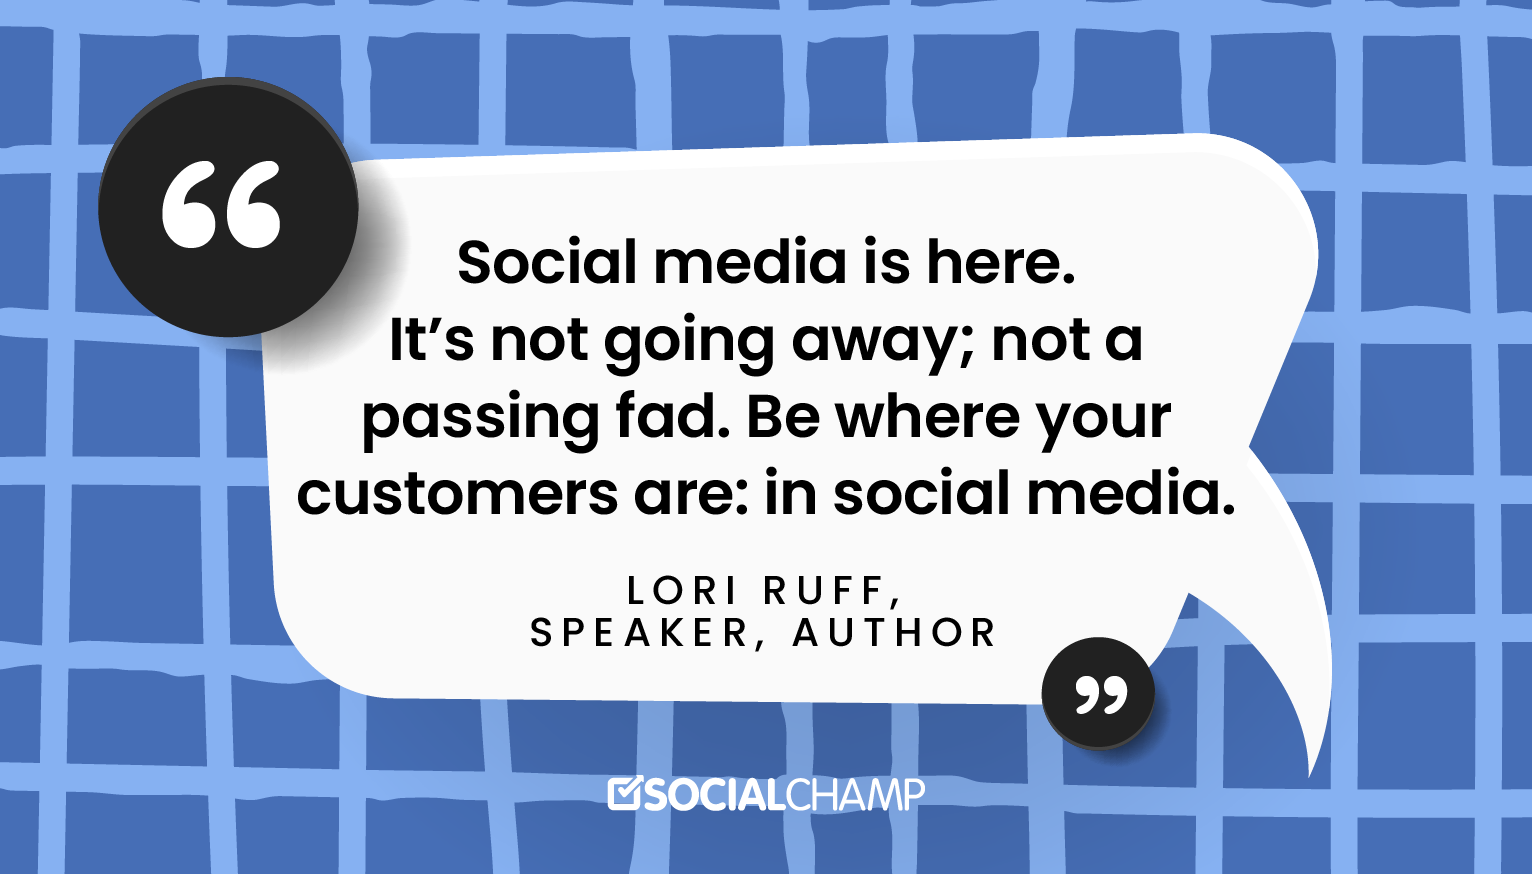 Social Media Marketing Quotes by Influencers